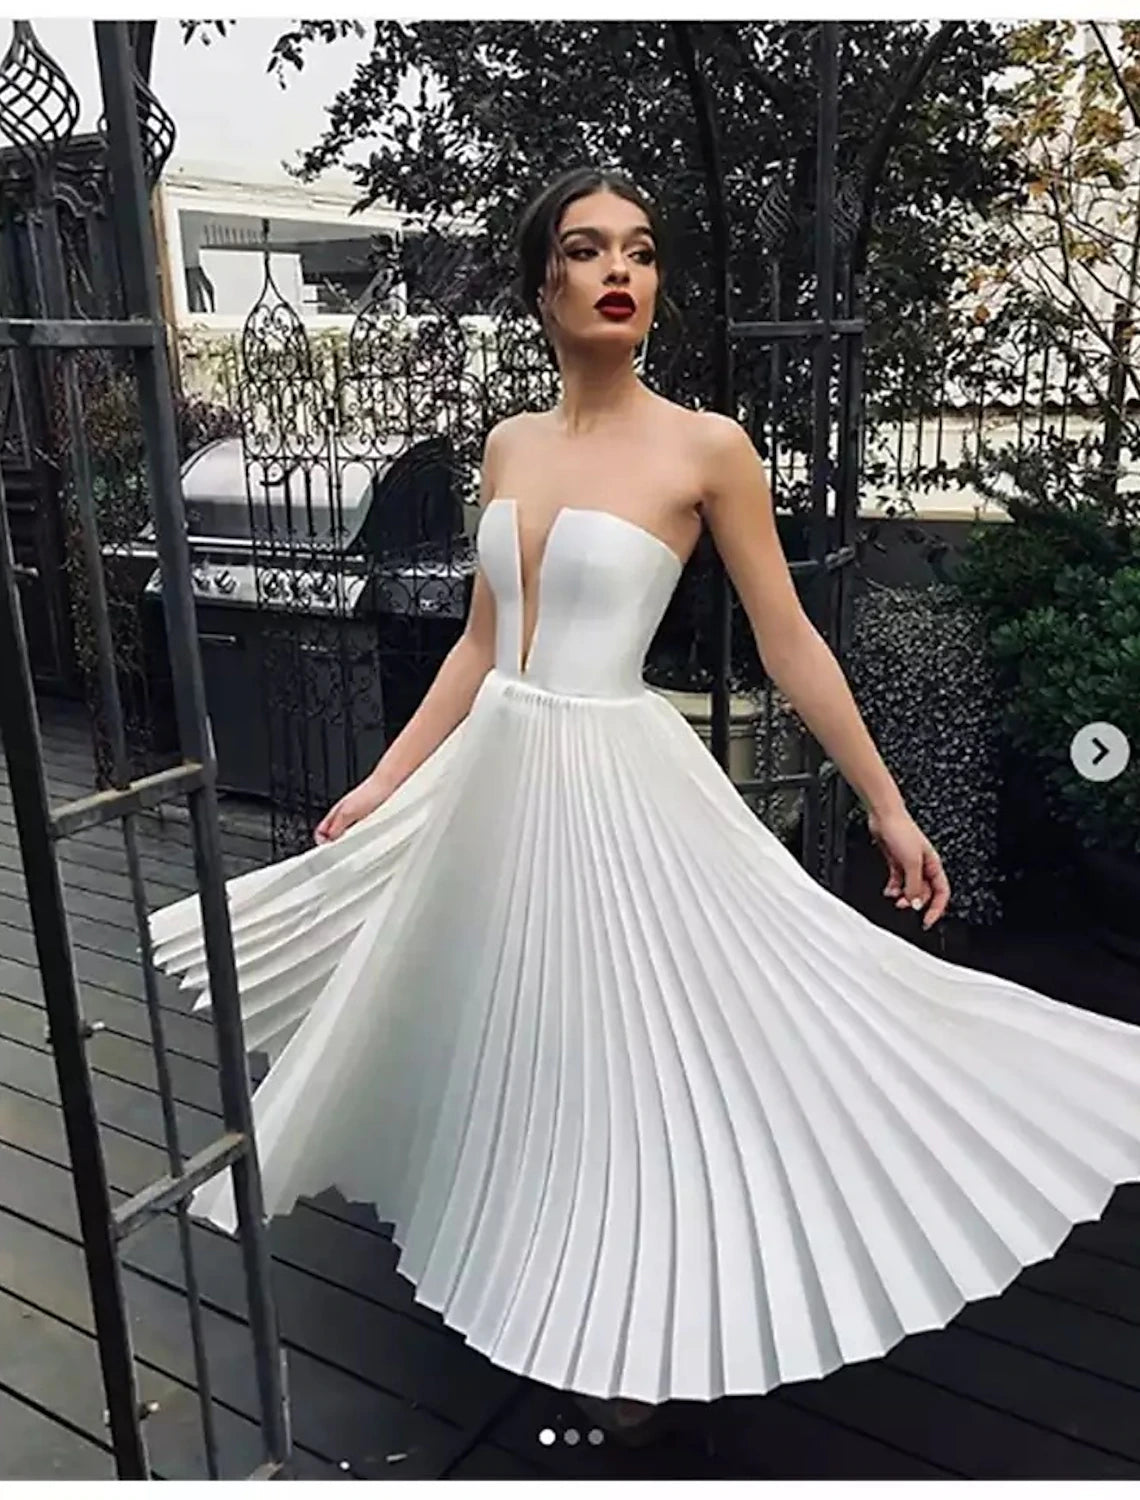 Reception Little White Dresses Wedding Dresses A-Line Sweetheart Strapless Ankle Length Lace Bridal Gowns With Pleats Solid Color